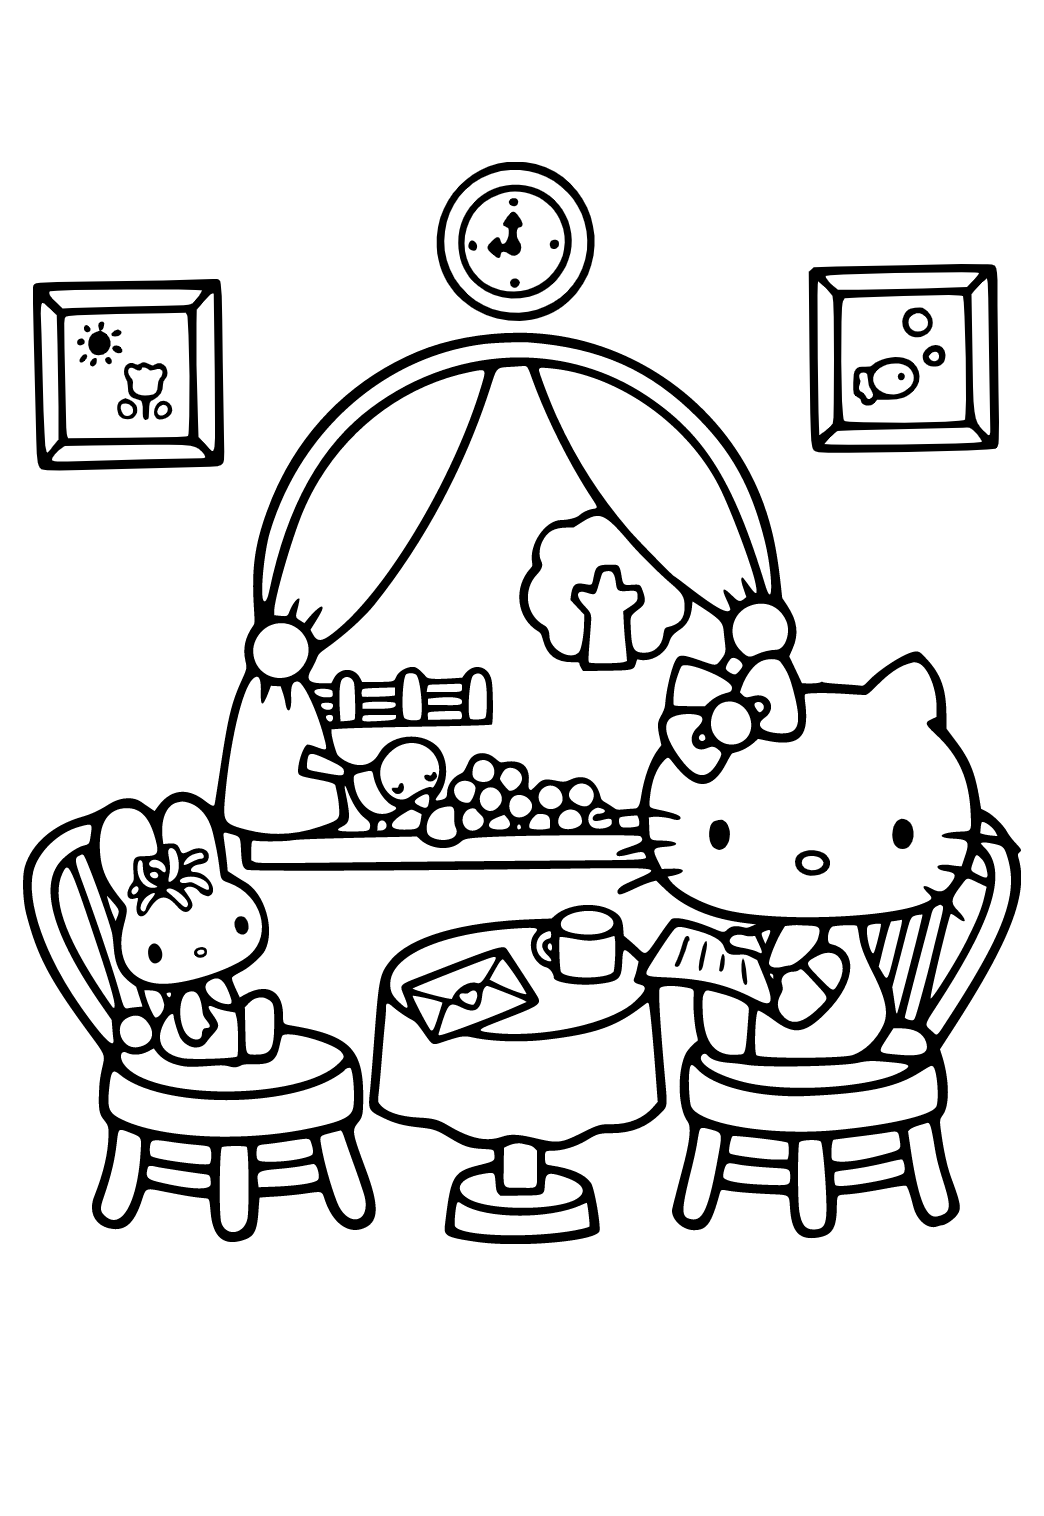 Free Printable Hello Kitty Dolphin Coloring Page for Adults and Kids 